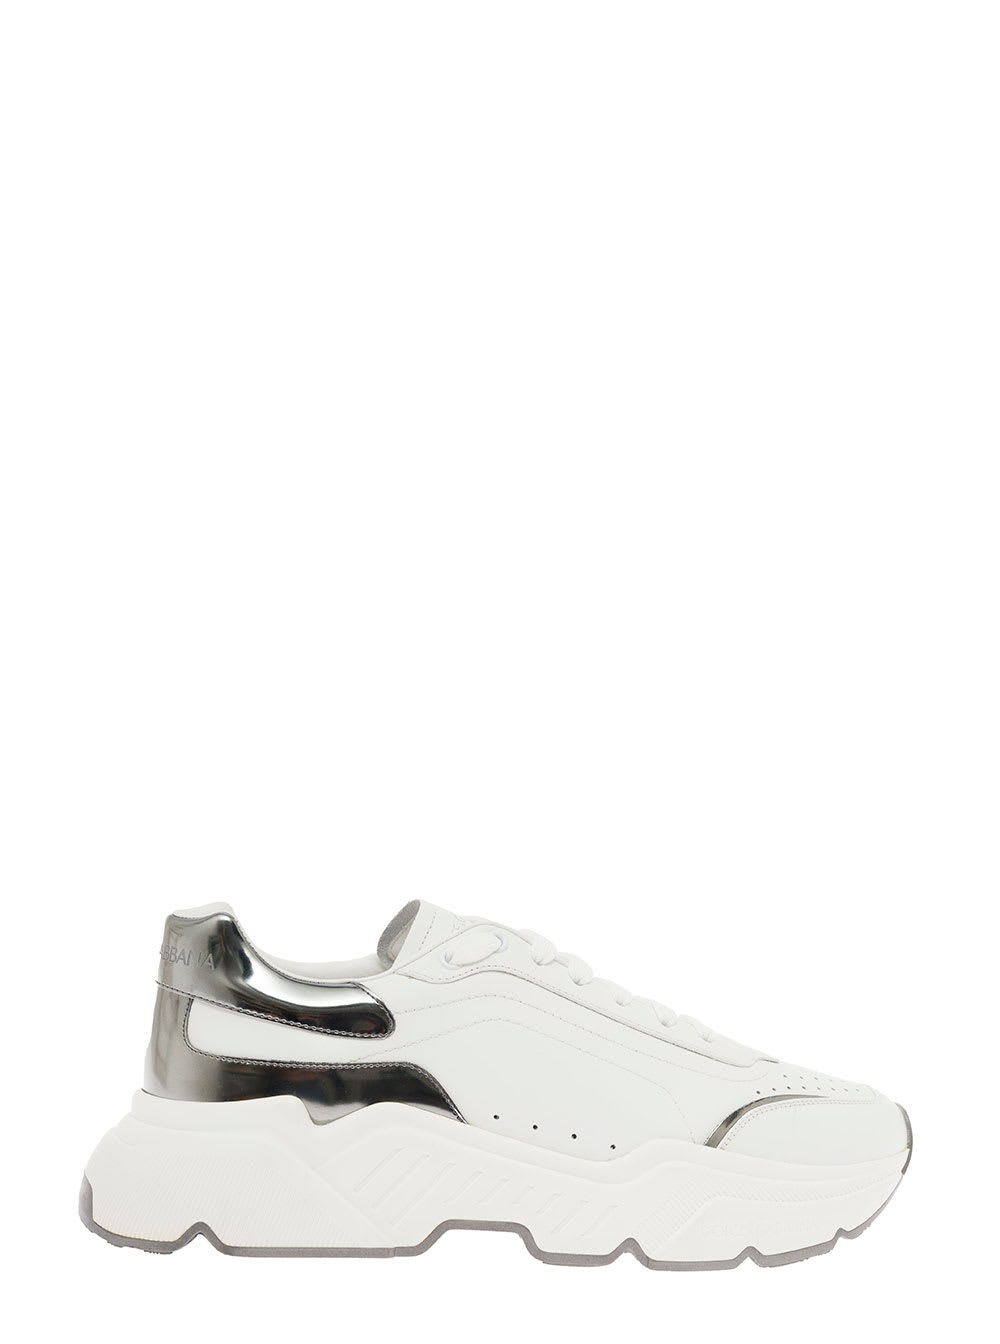 Dolce & Gabbana Mans Daymaster White And Silver Leather Sneakers